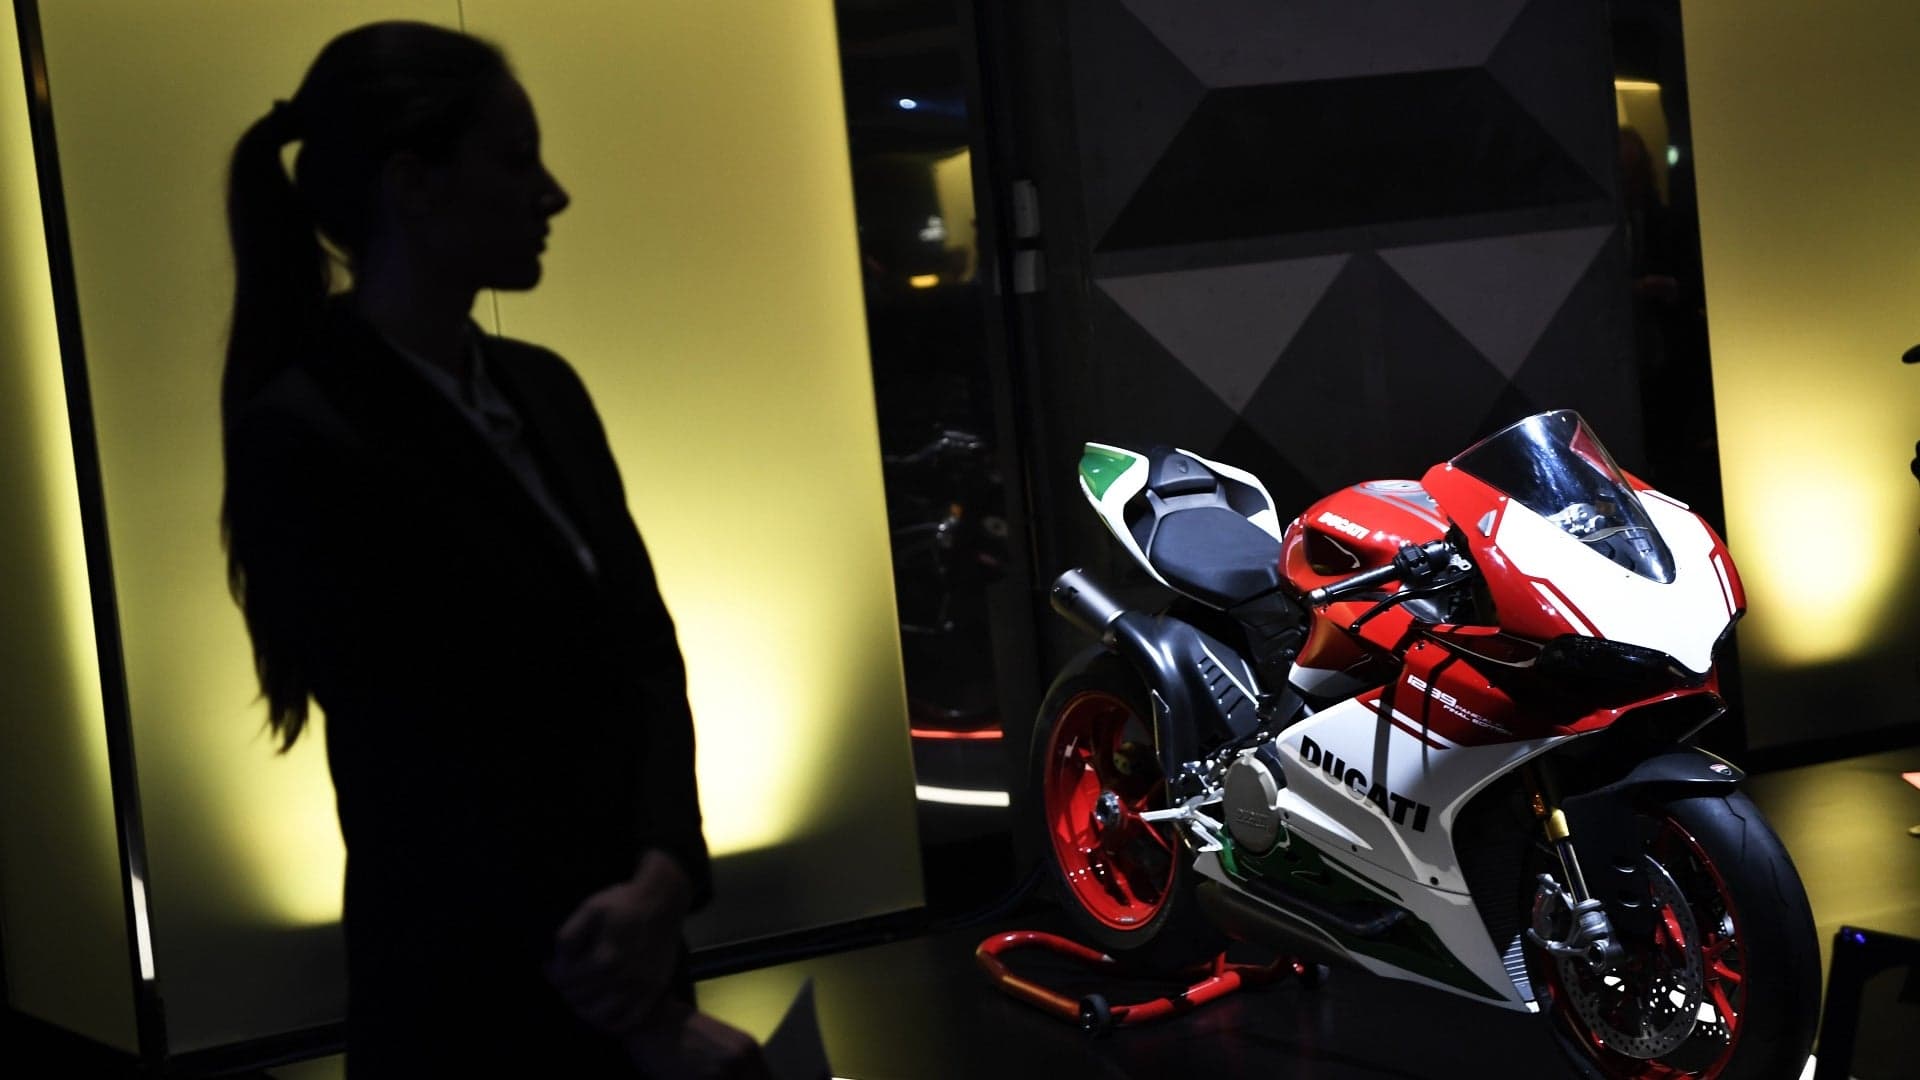 Ducati Sales Grow for the Eighth Year in a Row